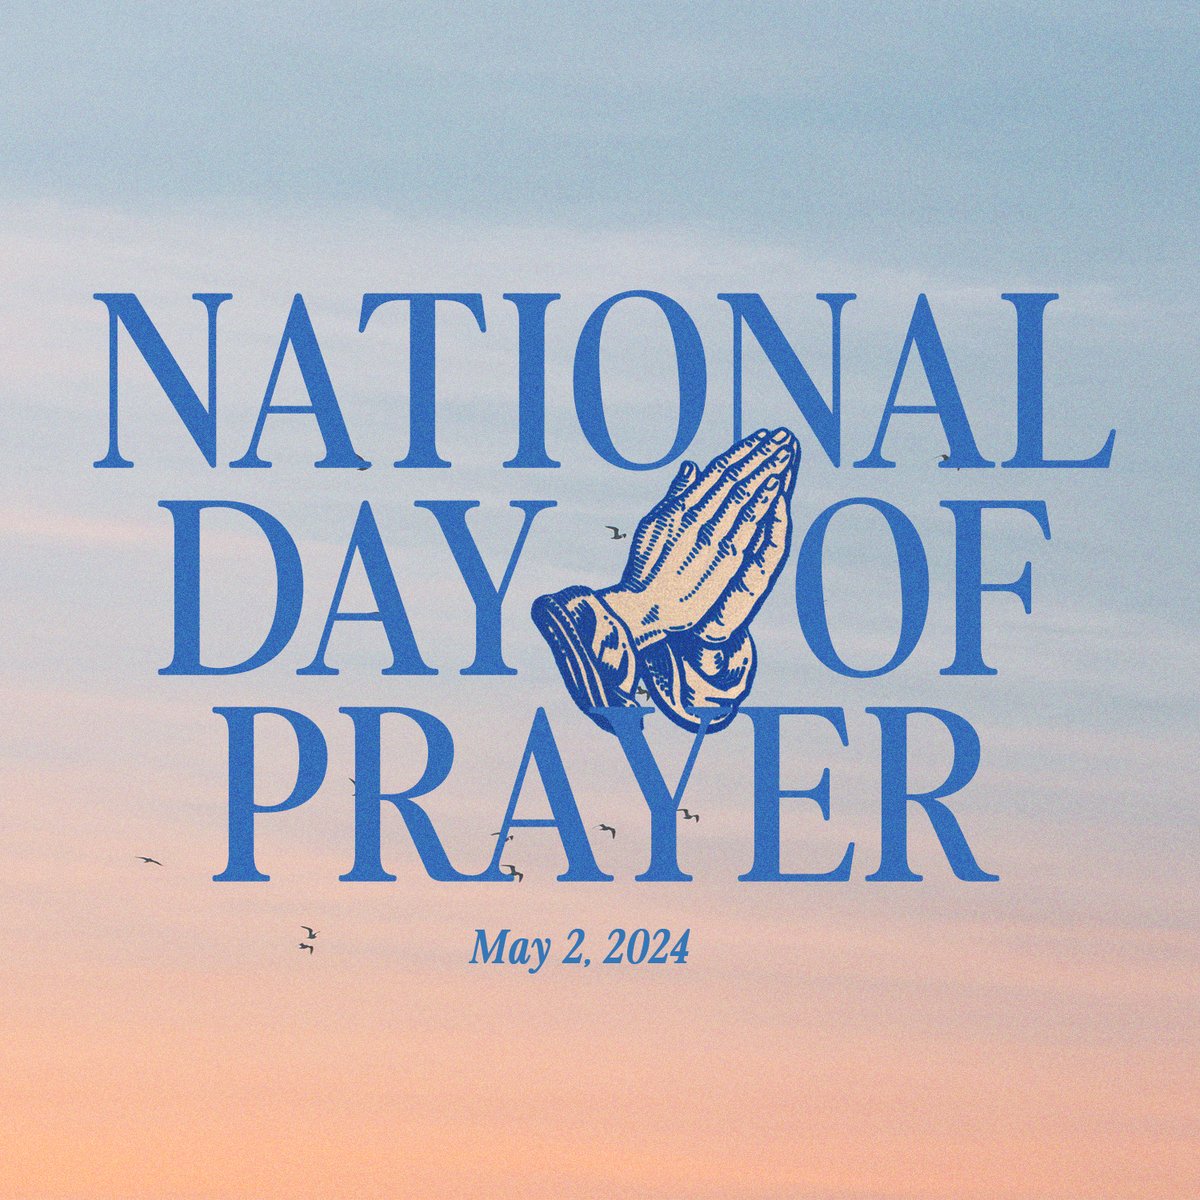 This country was built on the love of God, family, and country. Happy National Day of Prayer. “Now may the God of hope fill you with all joy and peace in believing, that you may abound in hope by the power of the Holy Spirit.” – Romans 15:13